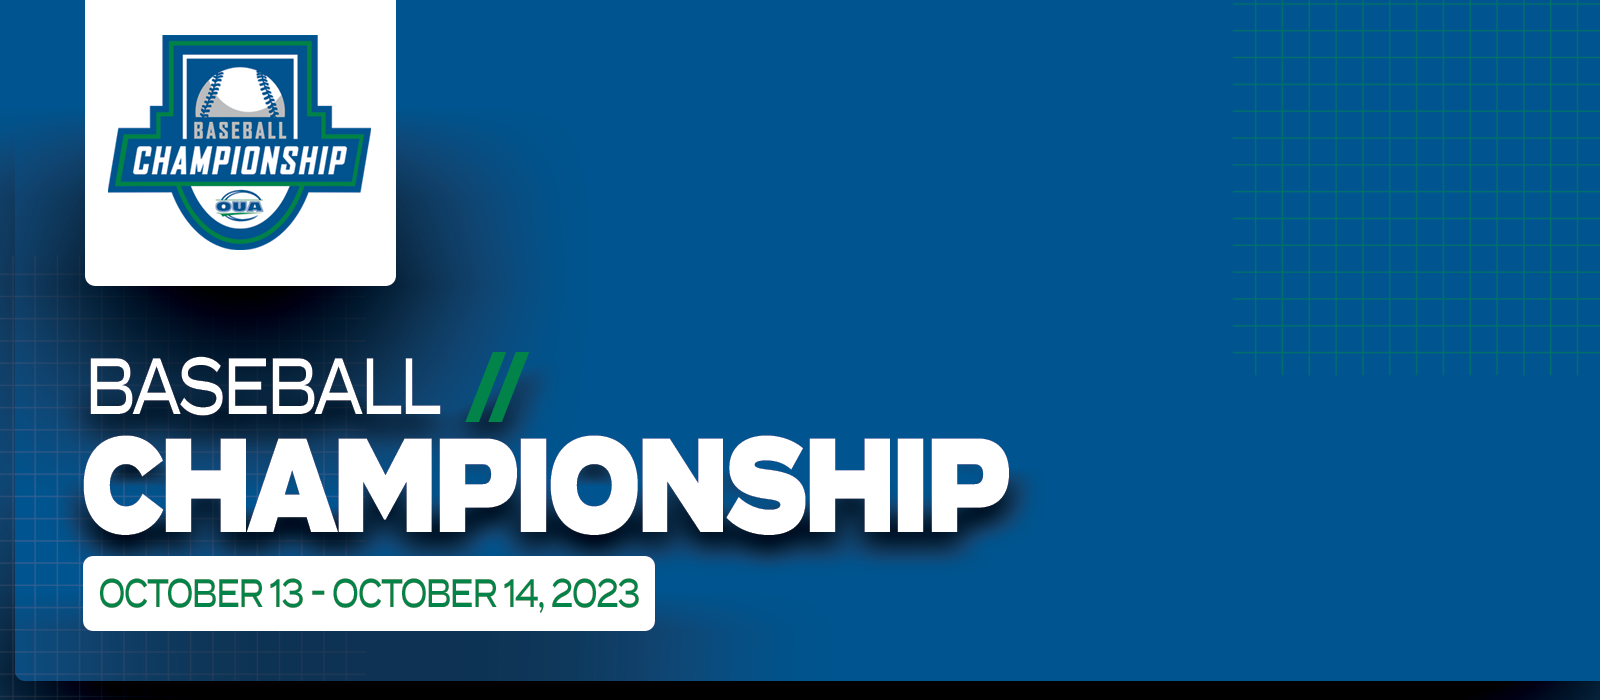 Predominantly blue graphic with large white text on the left side that reads Baseball Championship, October 13 – October 14, 2023’ beneath the OUA Baseball Championship logo